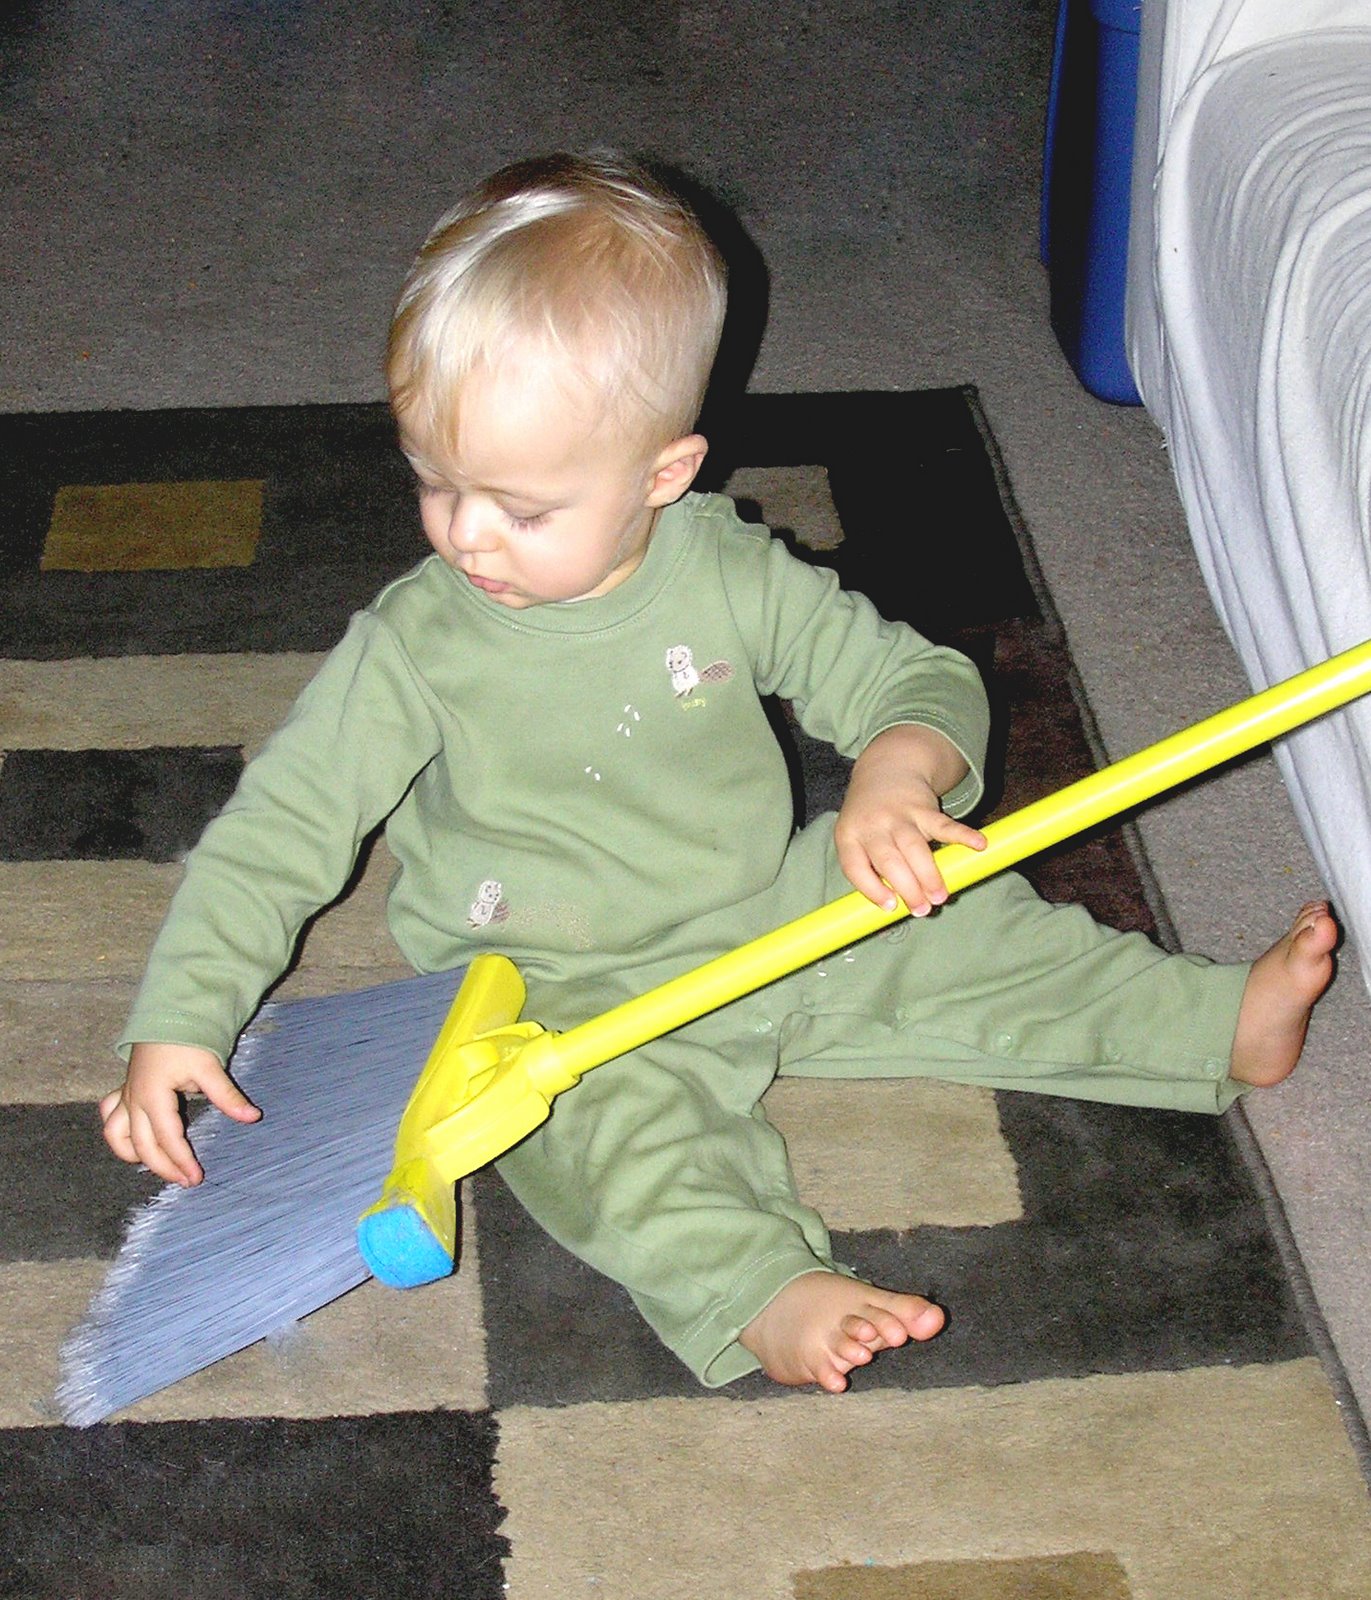 [a+bisums+a+broom+to+sweep+the+room.jpg]